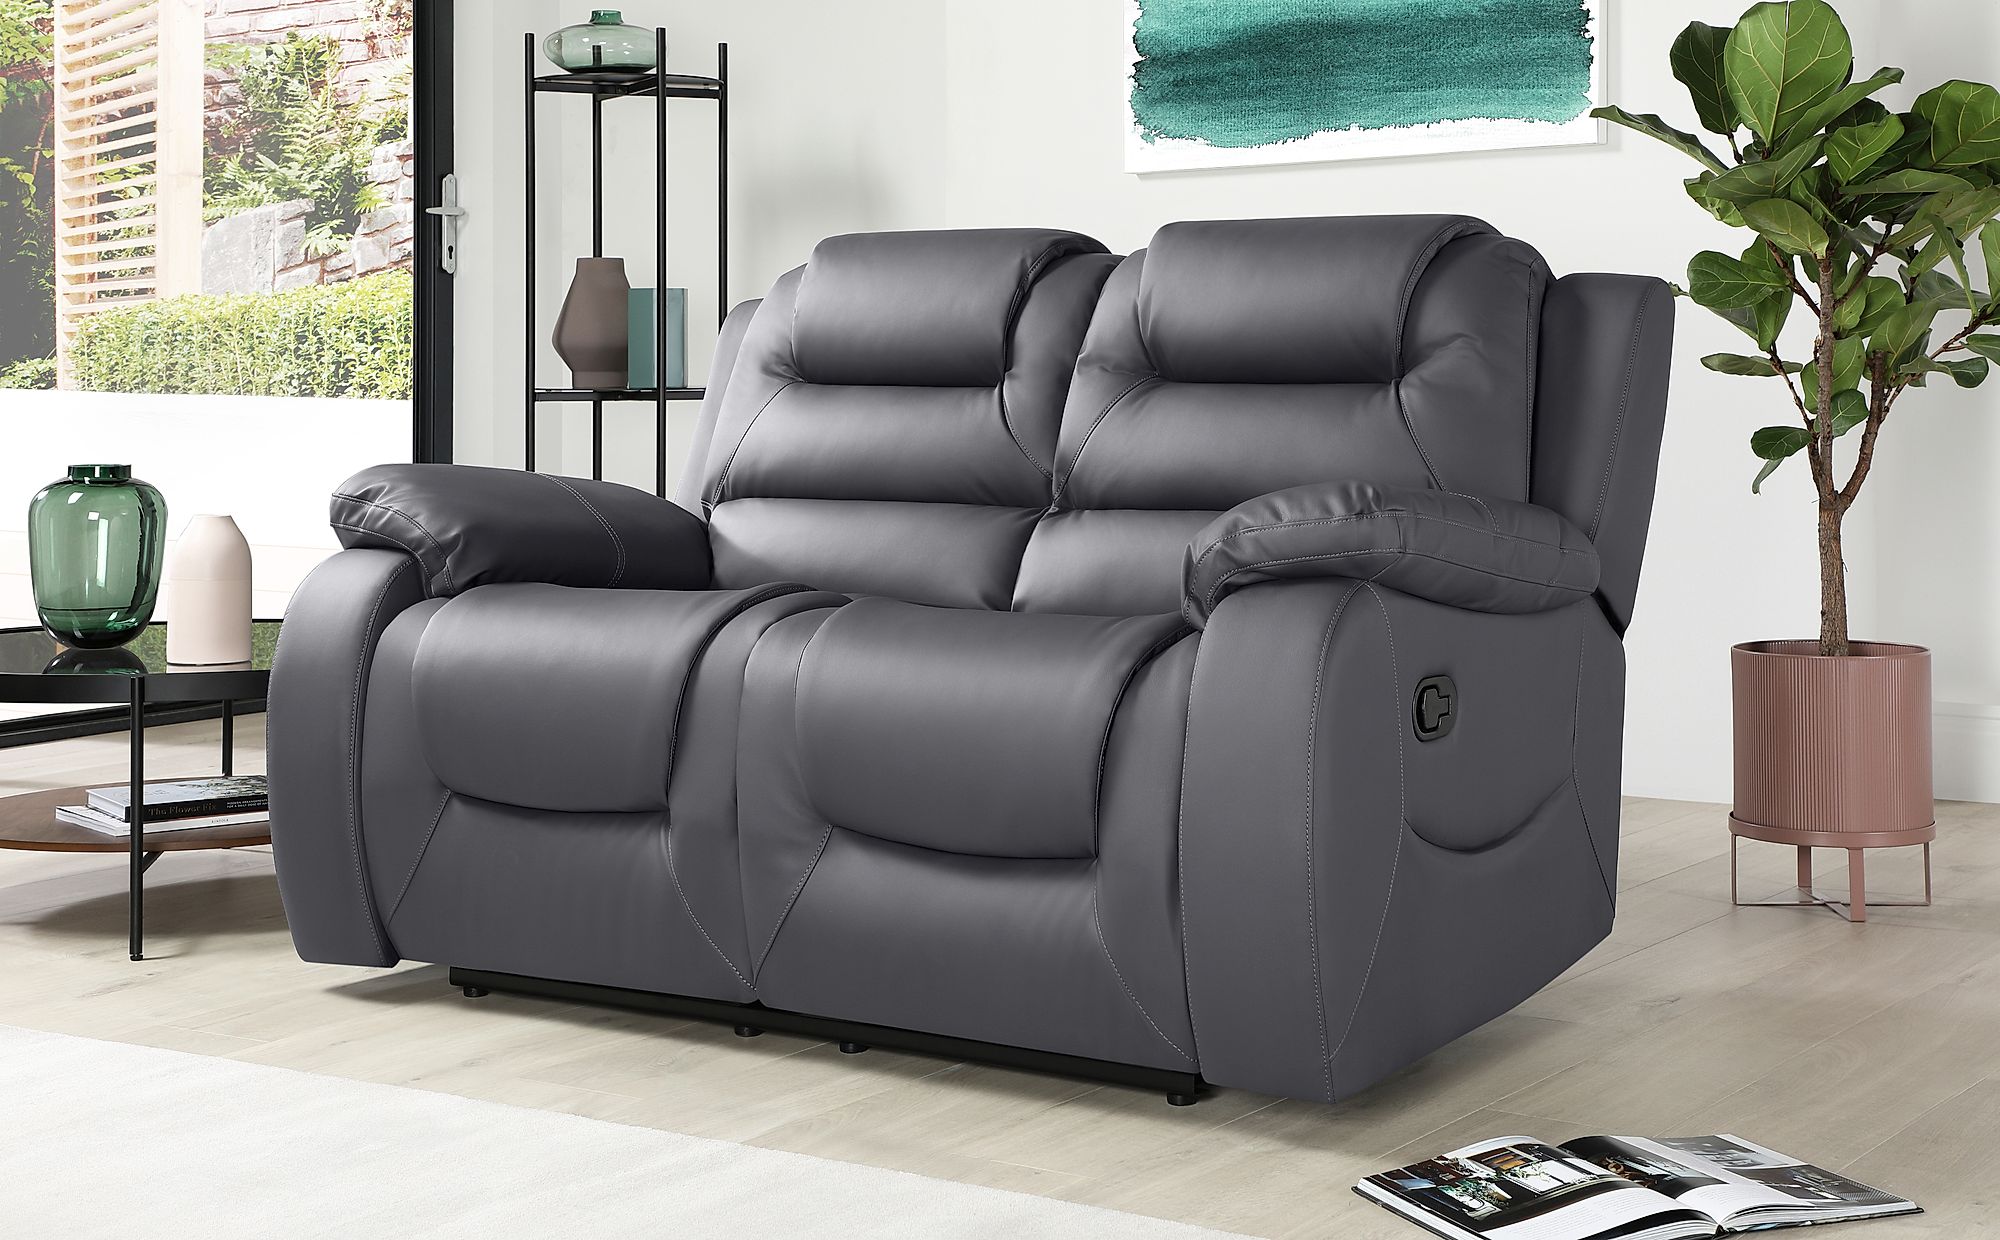 2 seater leather recliner sofa uk